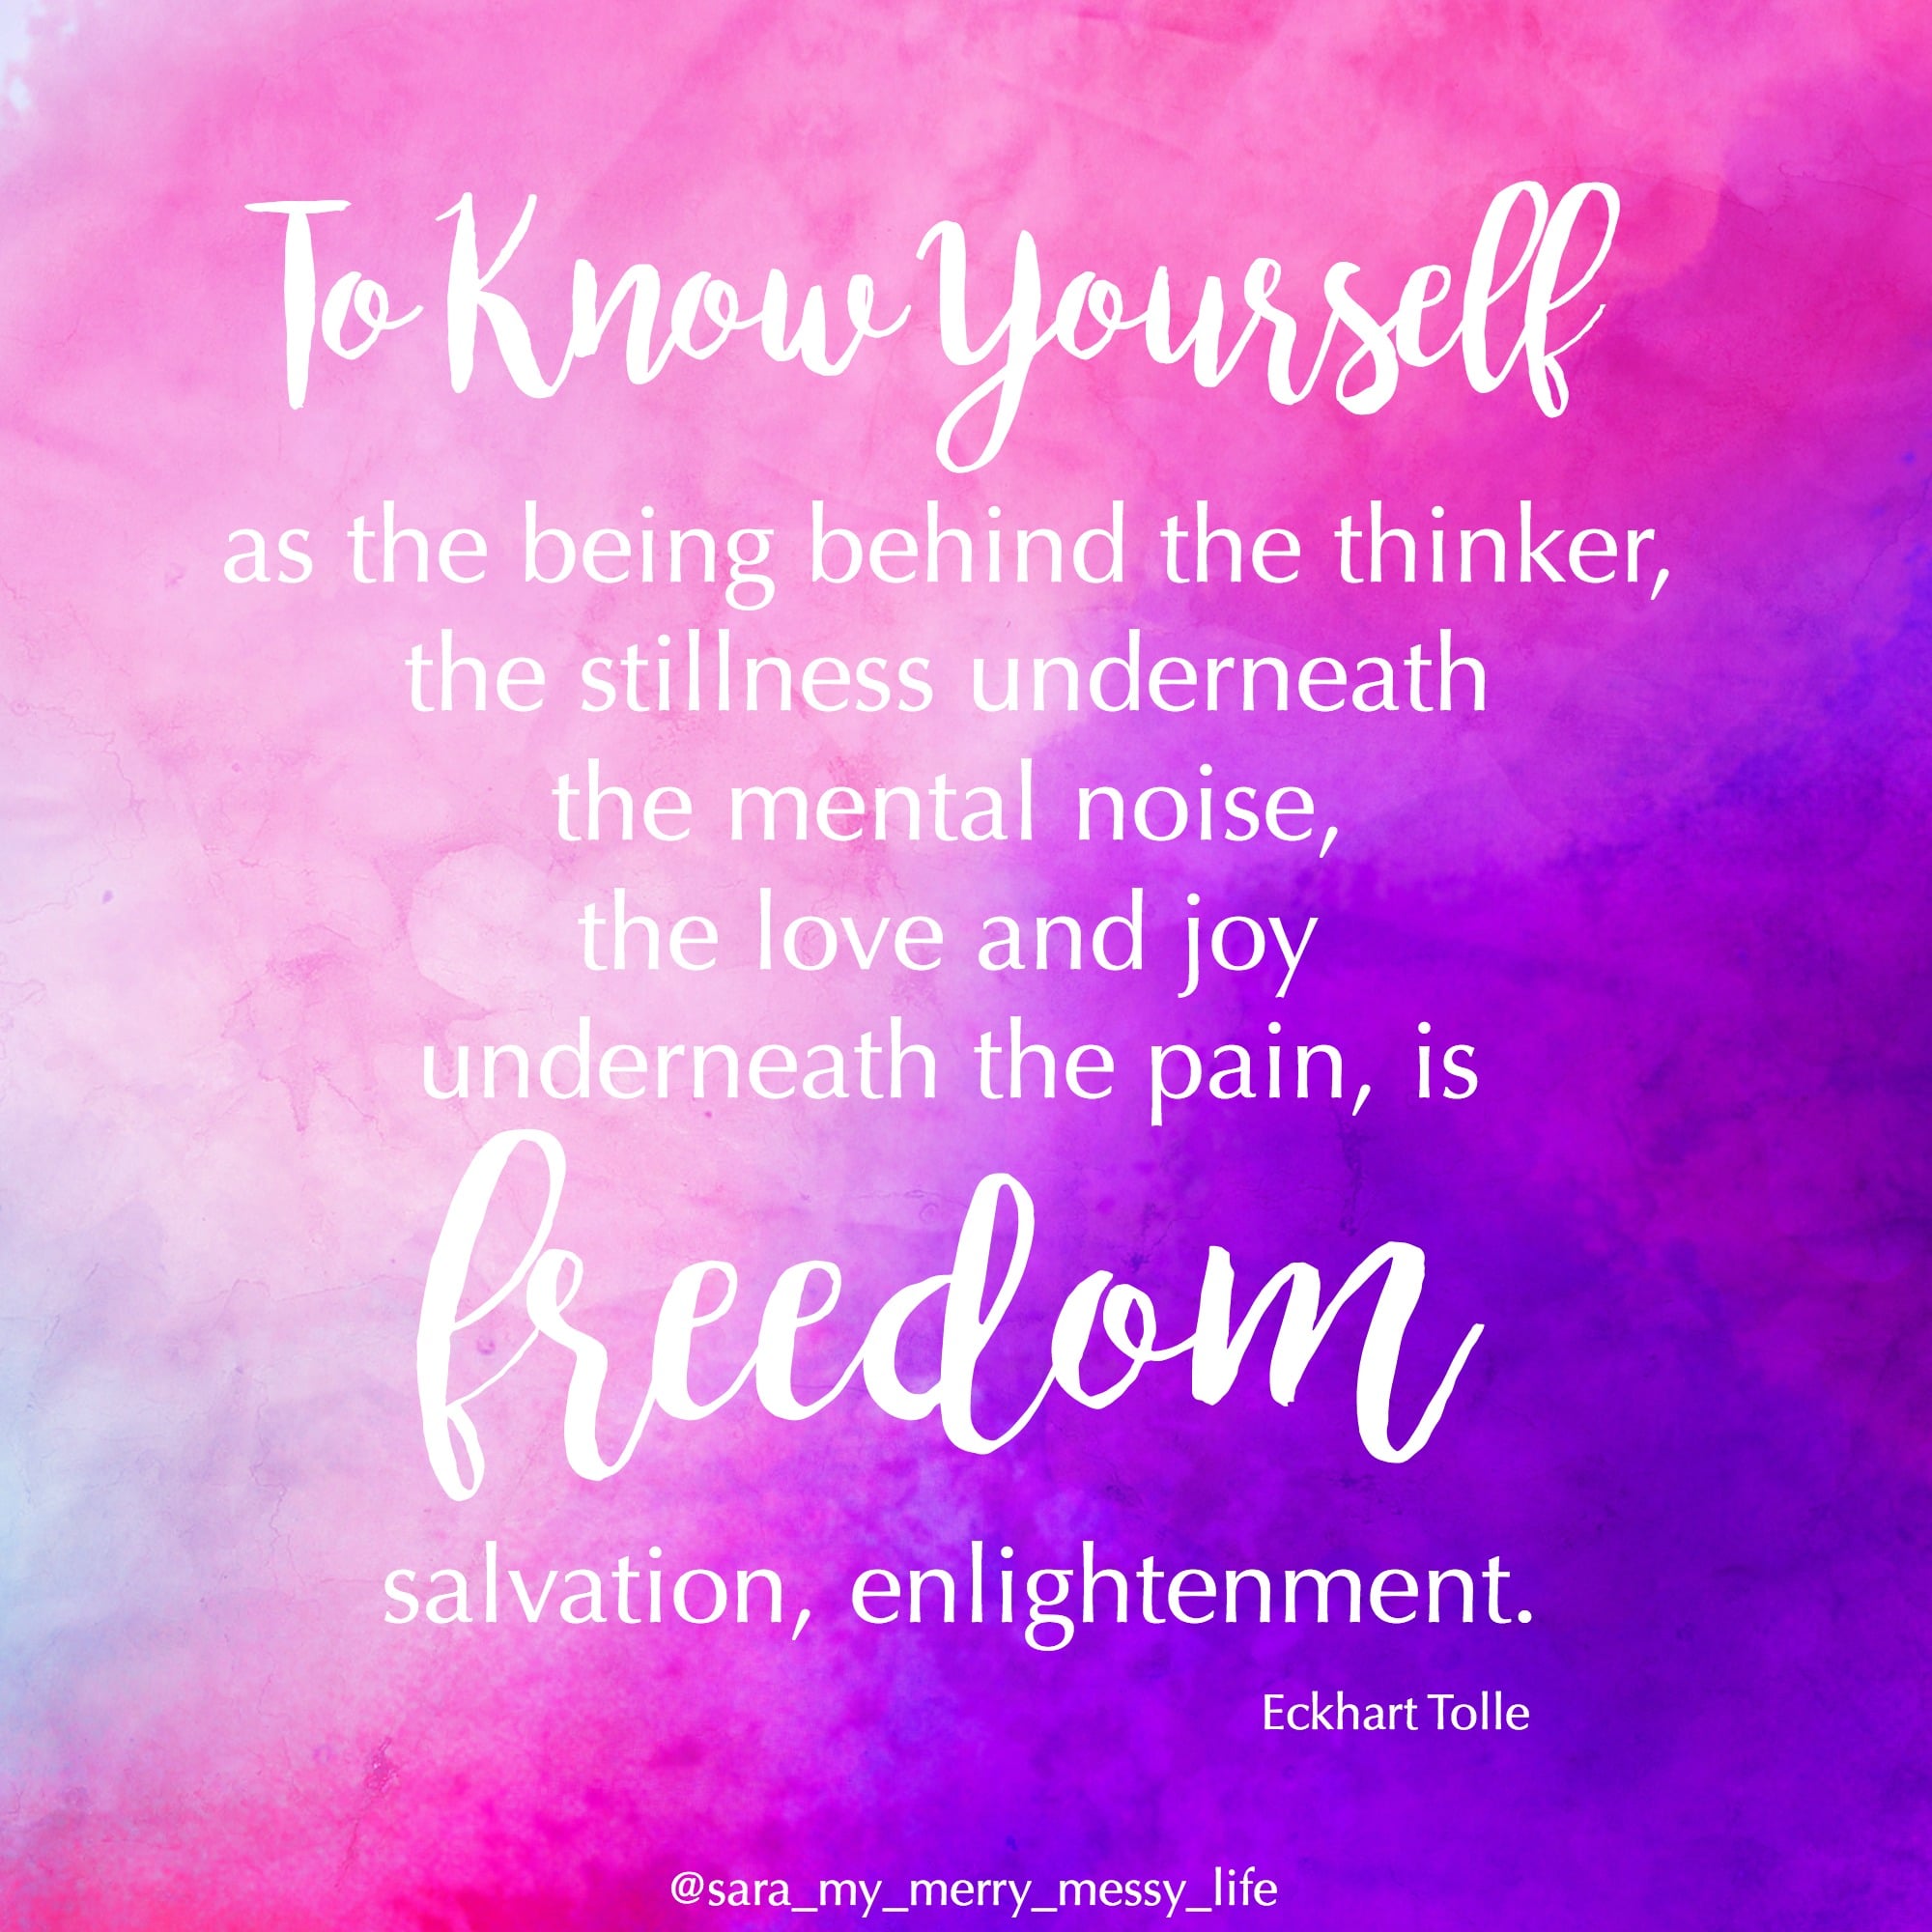 To know yourself - quote by Eckhart Tolle